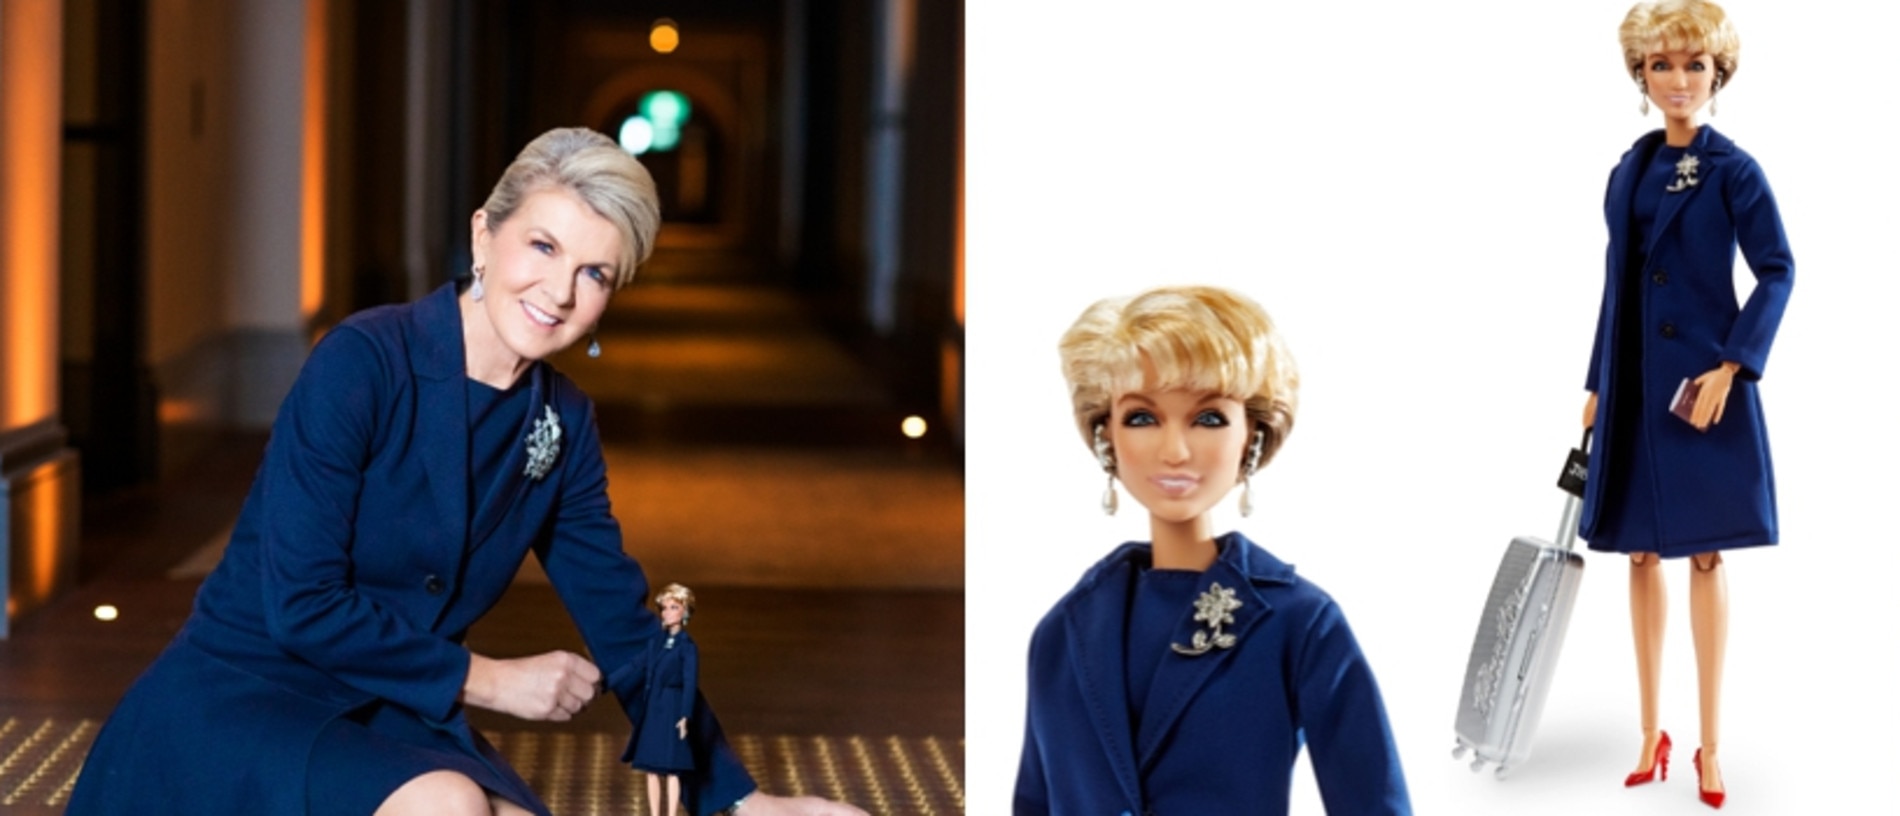 Assignment Freelance Picture Barbie reveals Julie Bishop, as Official 2021 Role Model for Australia